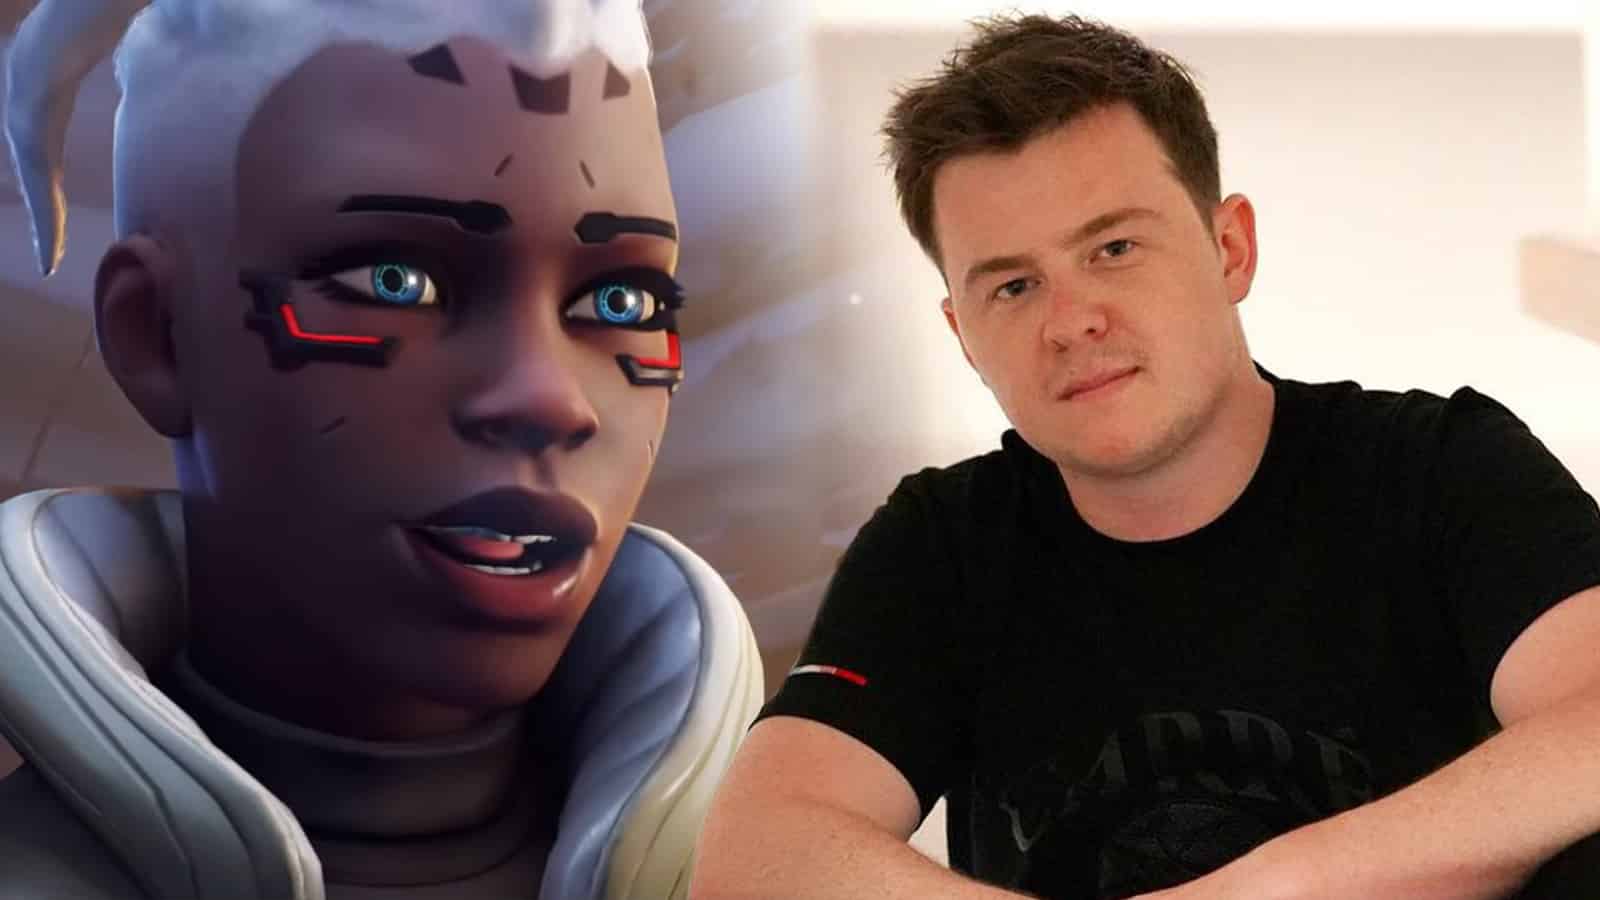 Muselk next to overwatch 2's sojourn